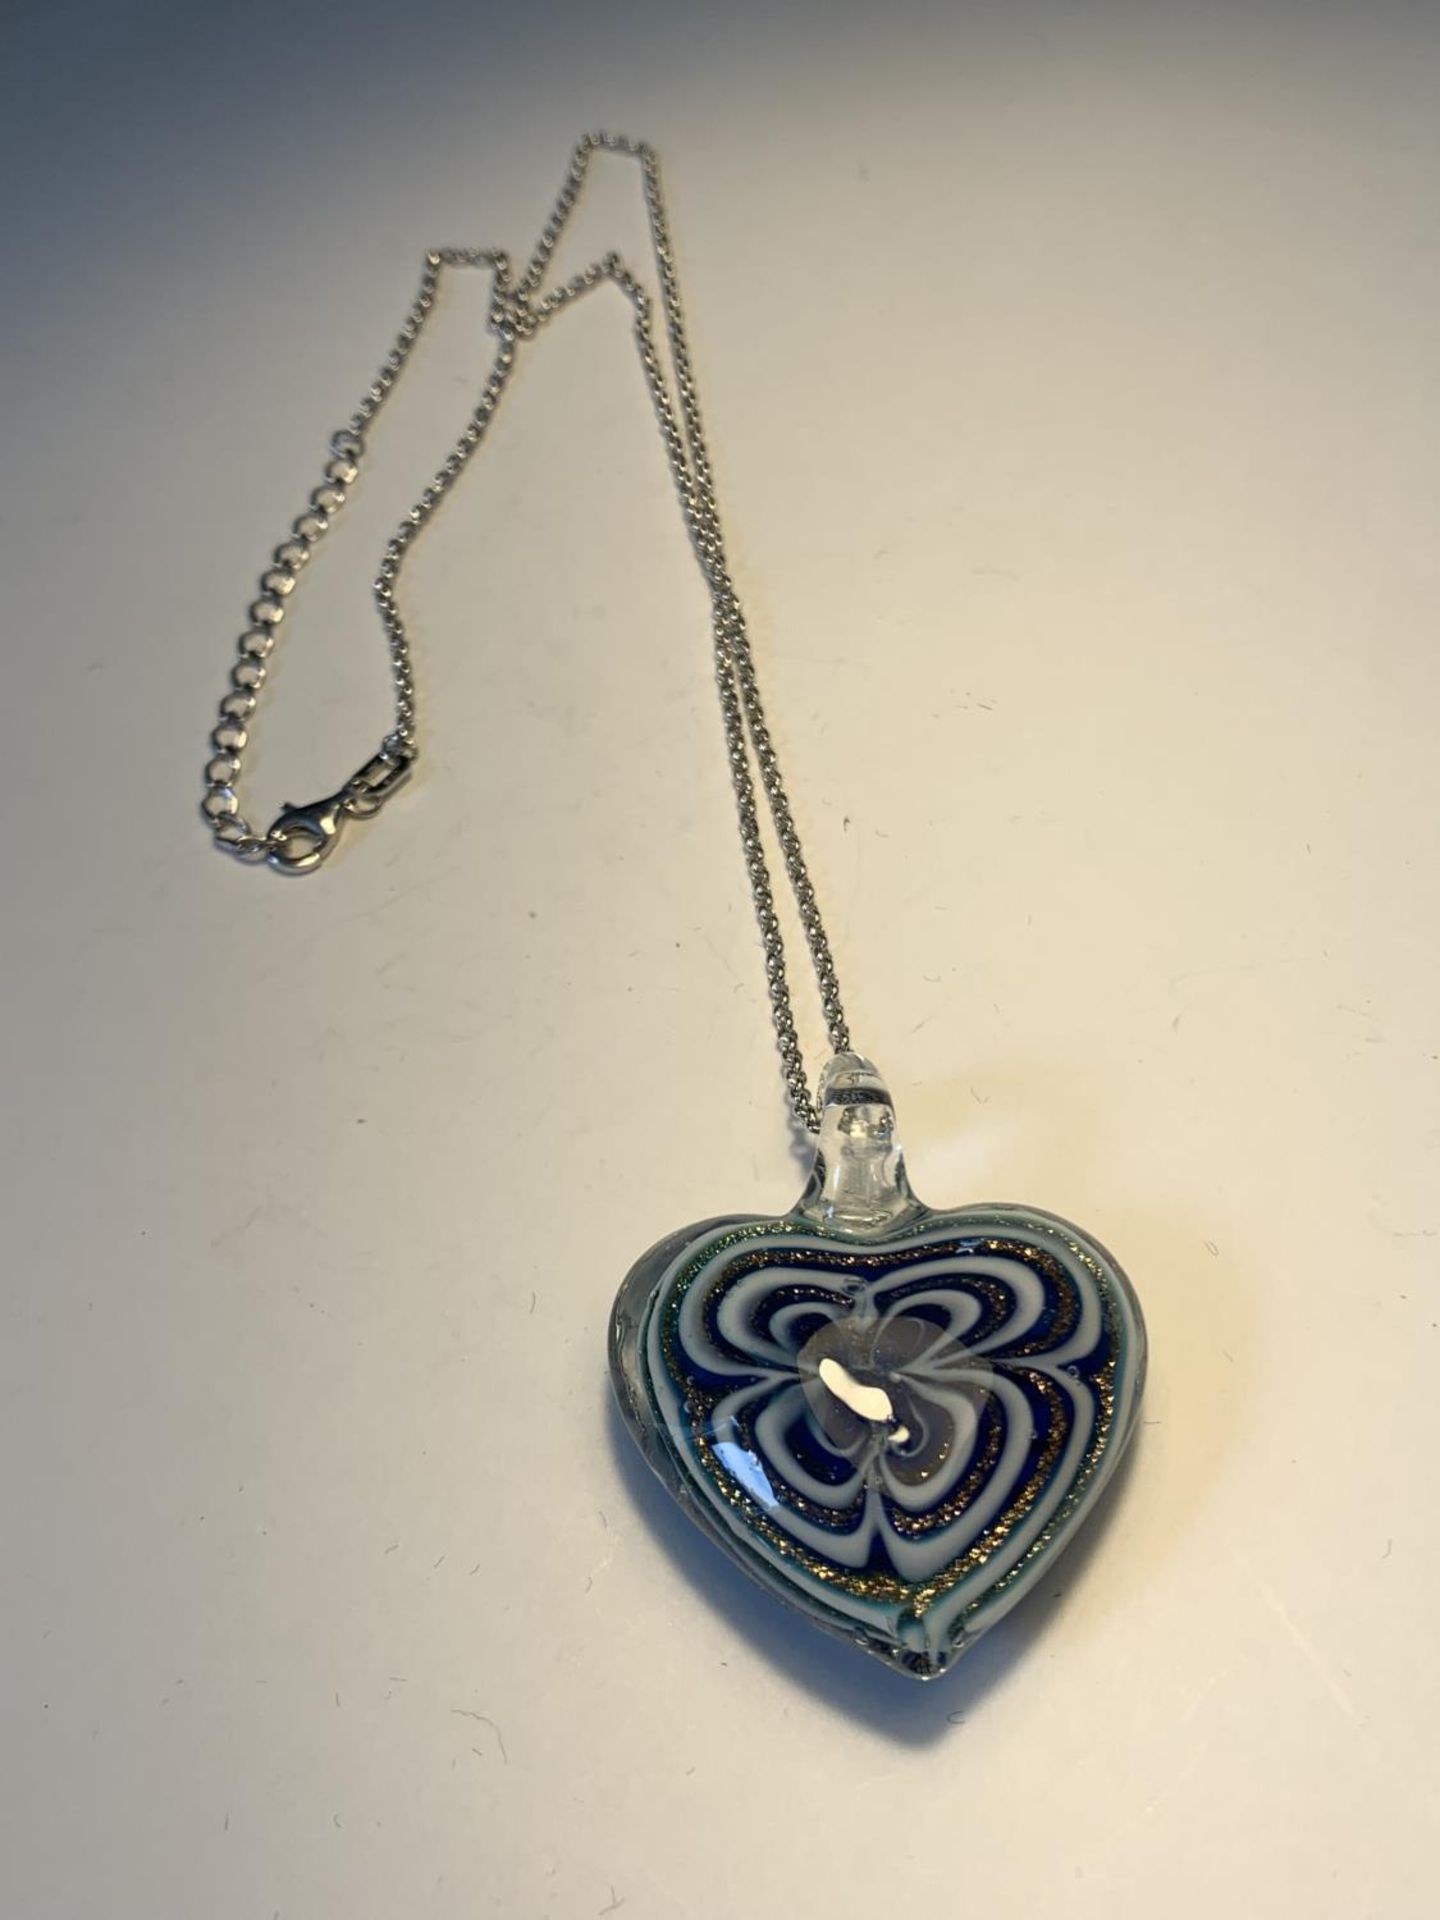 A MURANO GLASS HEART PENDANT ON A SILVER NECKLACE